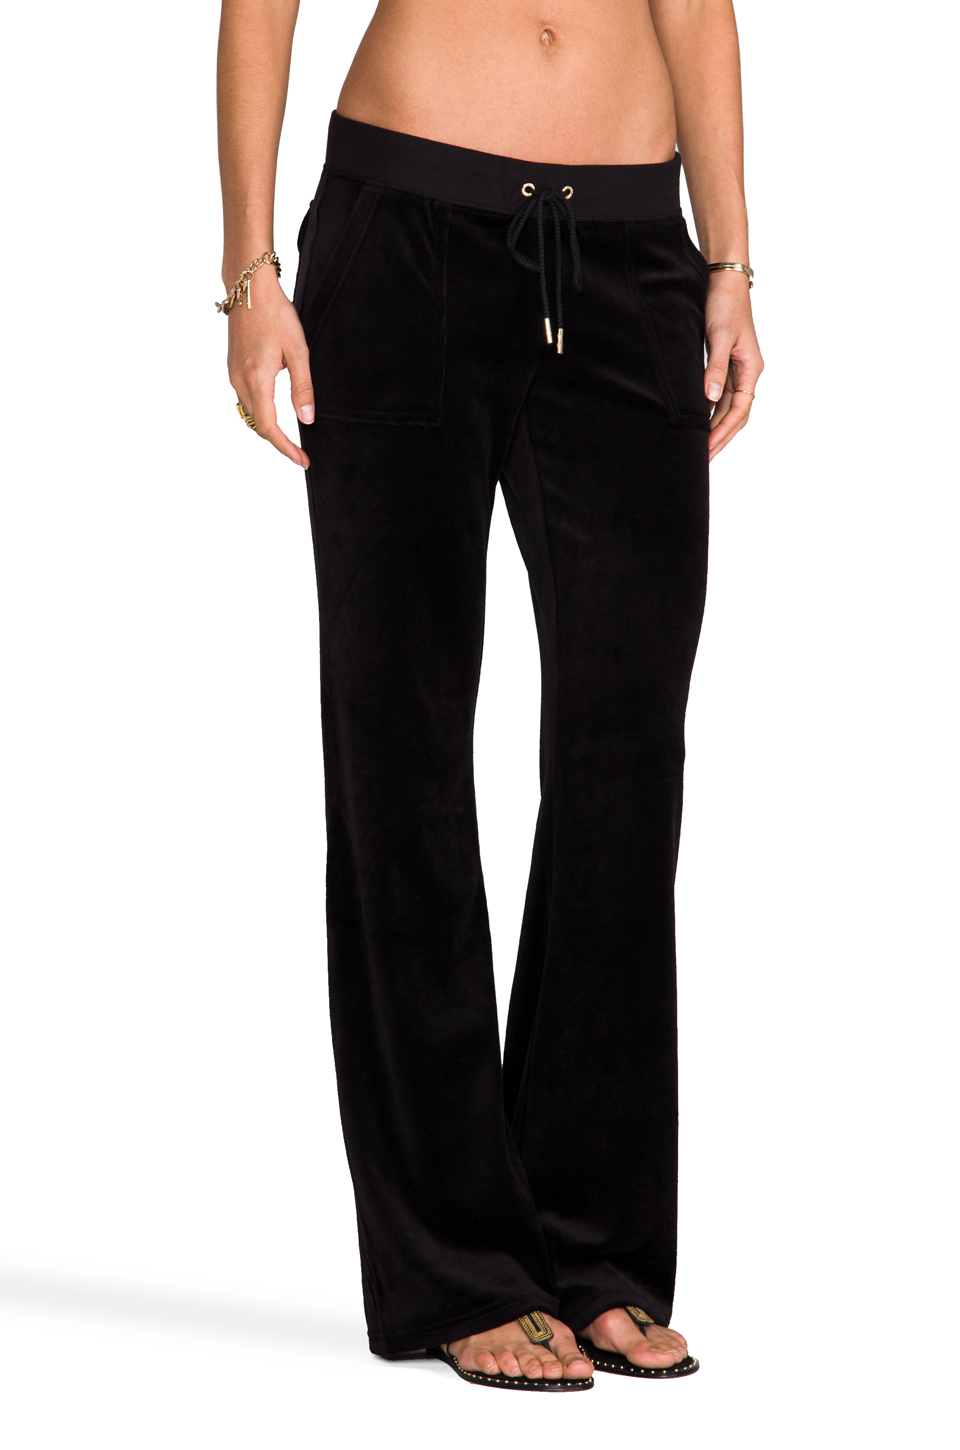 Juicy Couture Velour Bling Bootcut Pant in Black - Lyst